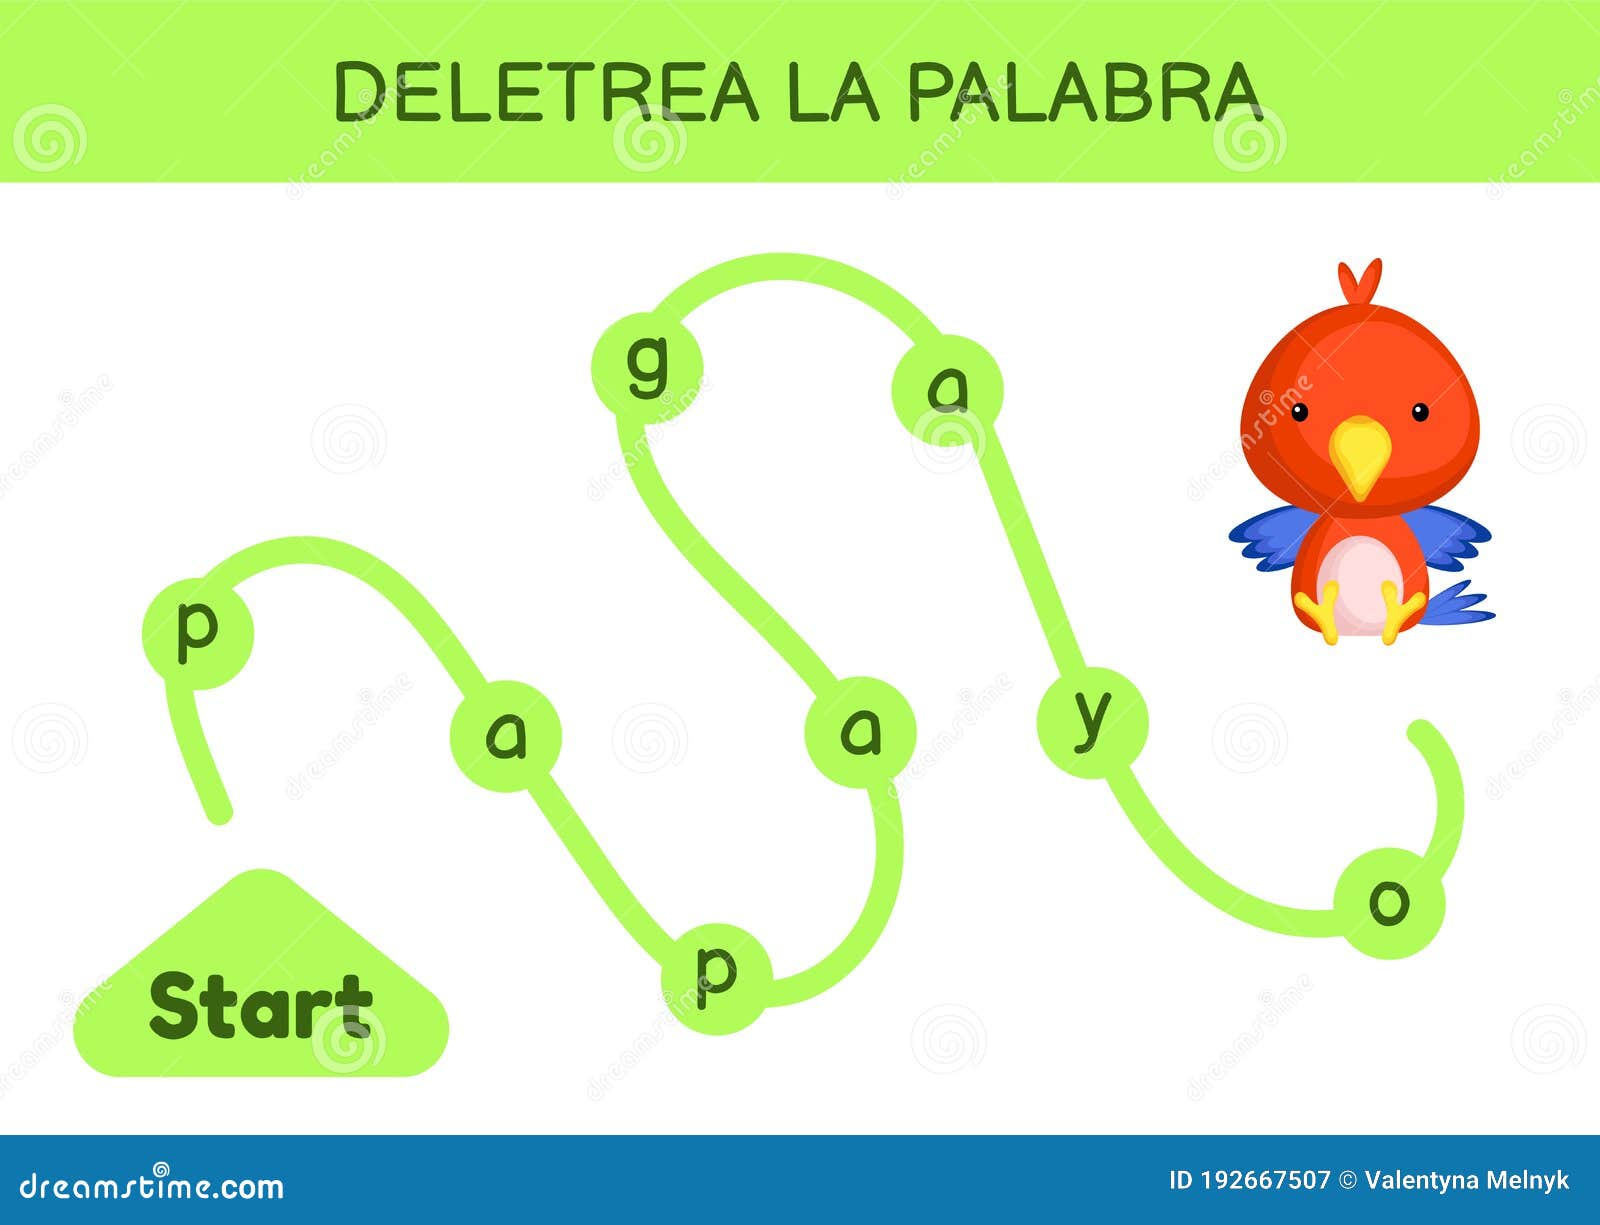 deletrea la palabra - spell the word. maze for kids. spelling word game template. learn to read word parrot. activity page for